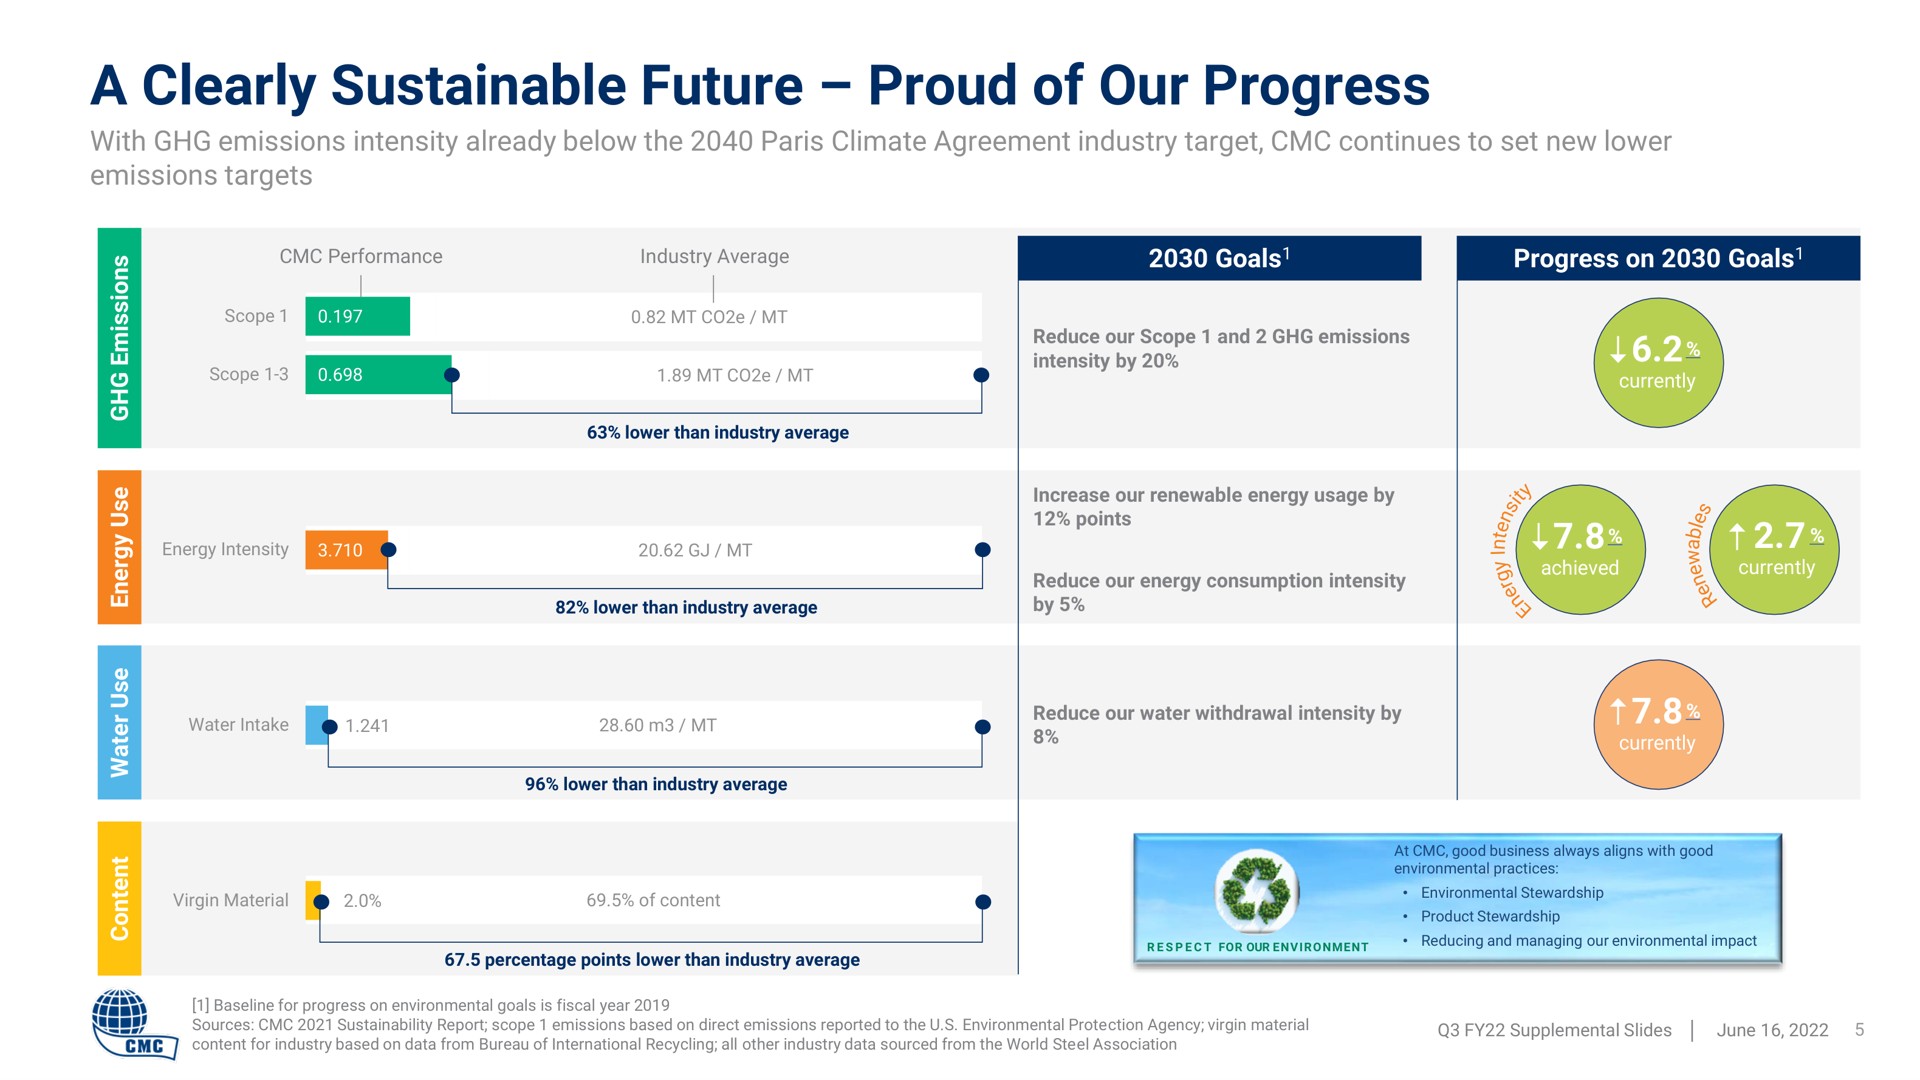 a clearly sustainable future of our progress | Commercial Metals Company